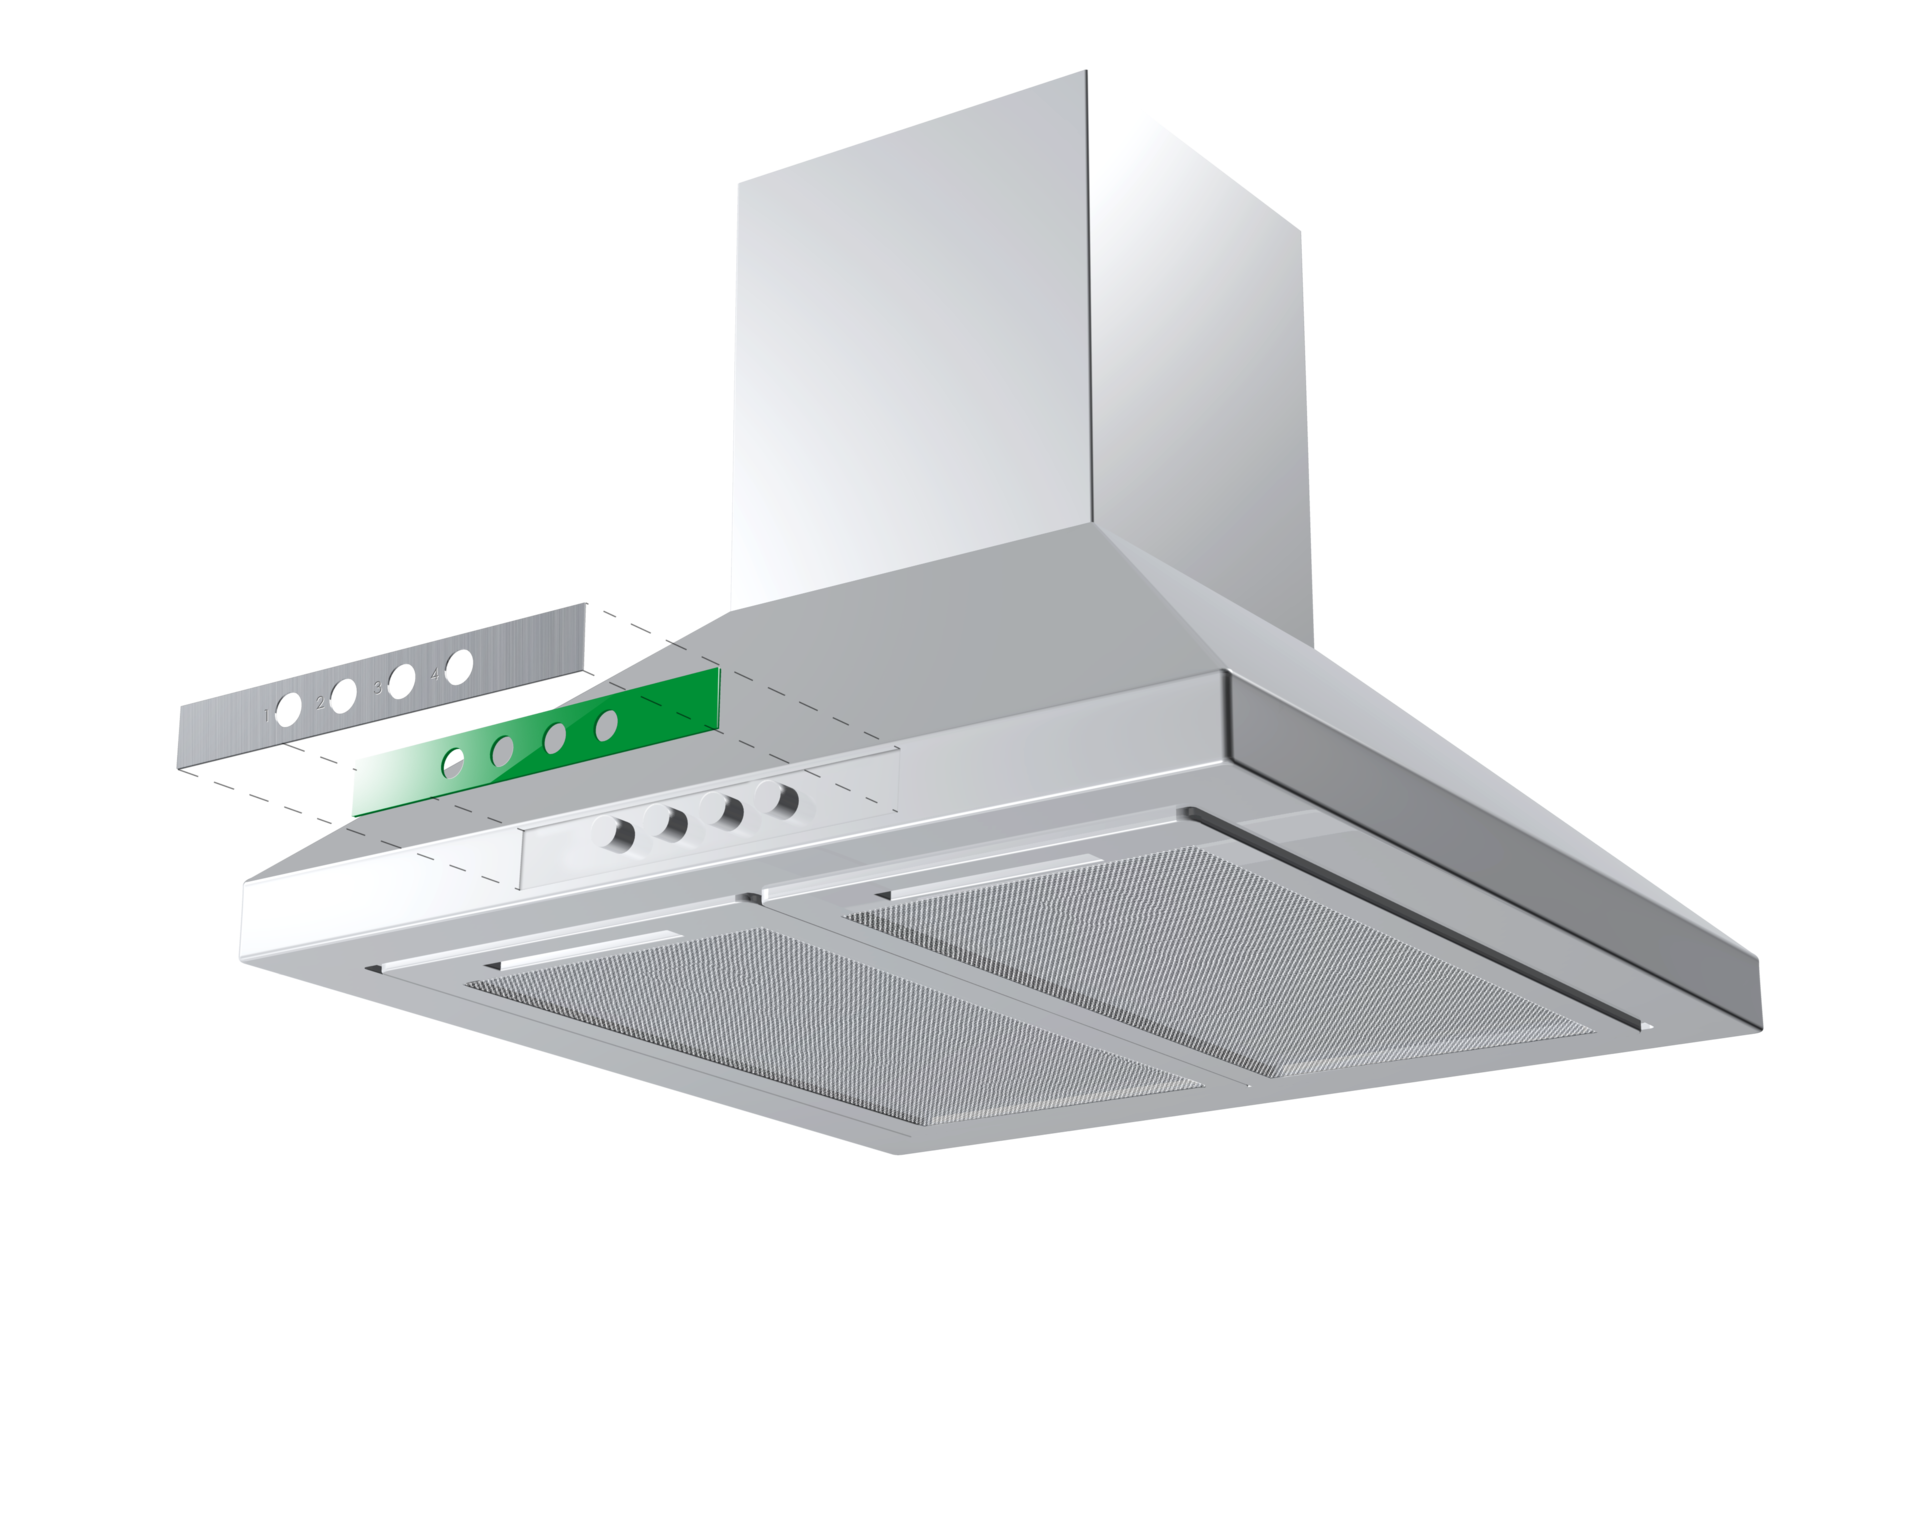 CG_HomeAppliances_Exhaust_Hood_Mechanical_Interface_2101_PNG_1920 (RGB).png